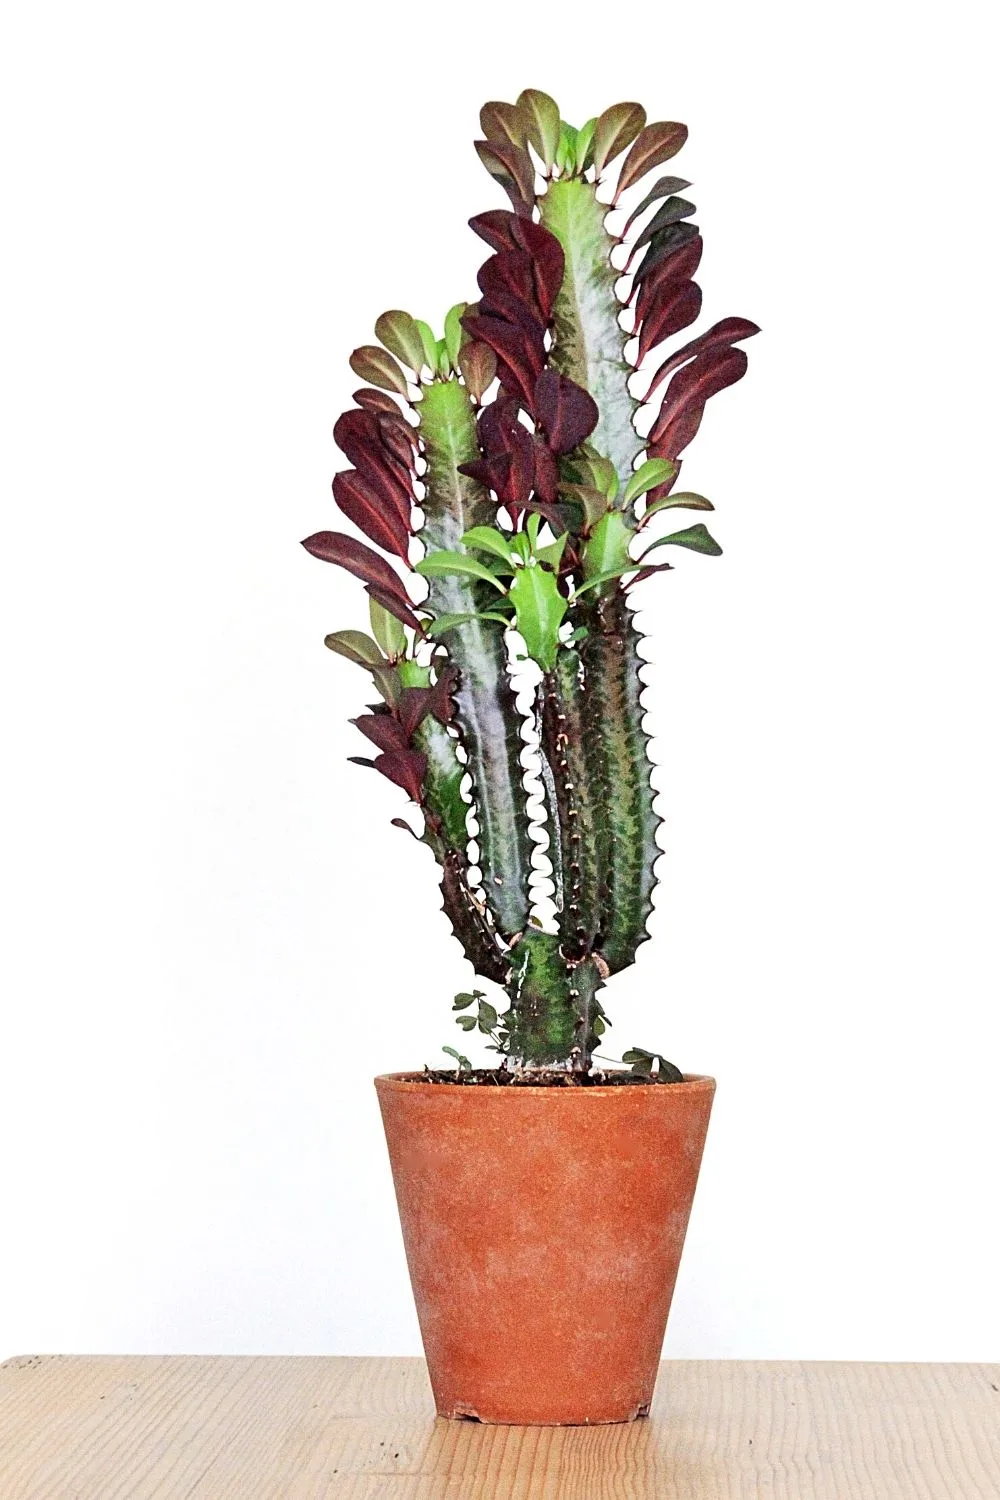 African Milk Bush (Euphorbia trigona) is a tropical plant that thrives in bright, indirect light